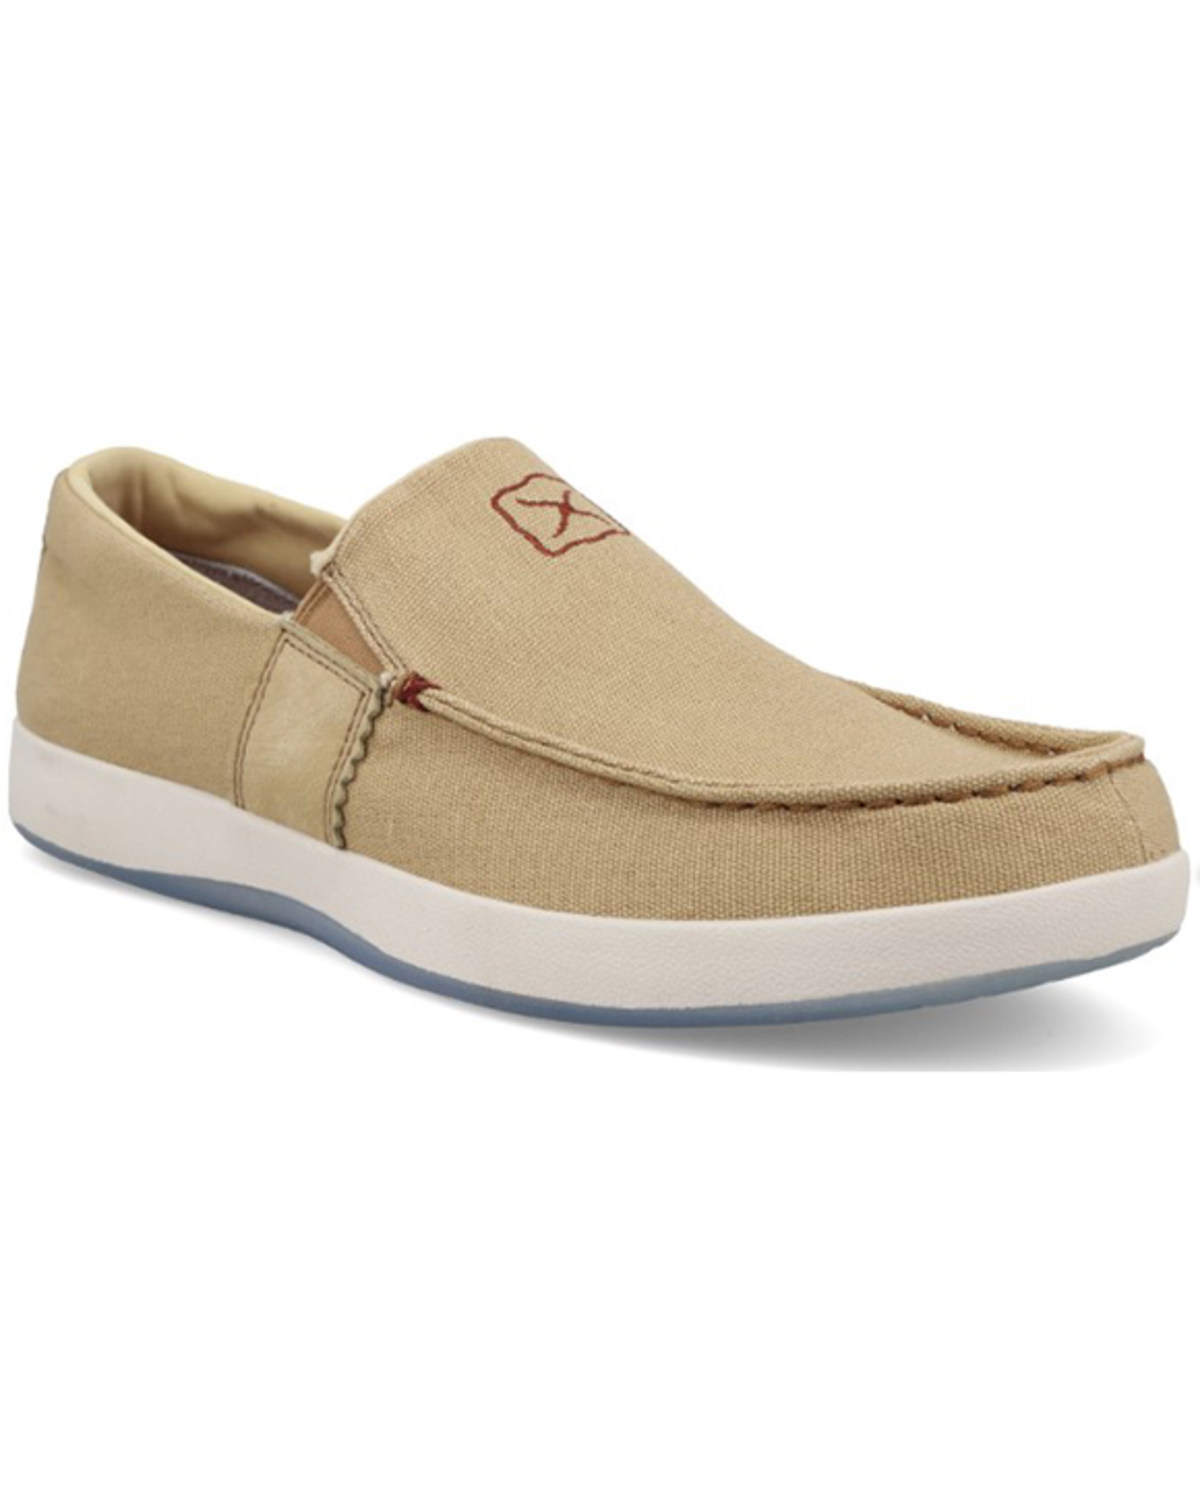 Twisted X Men's Slip-On Casual Shoes - Moc Toe